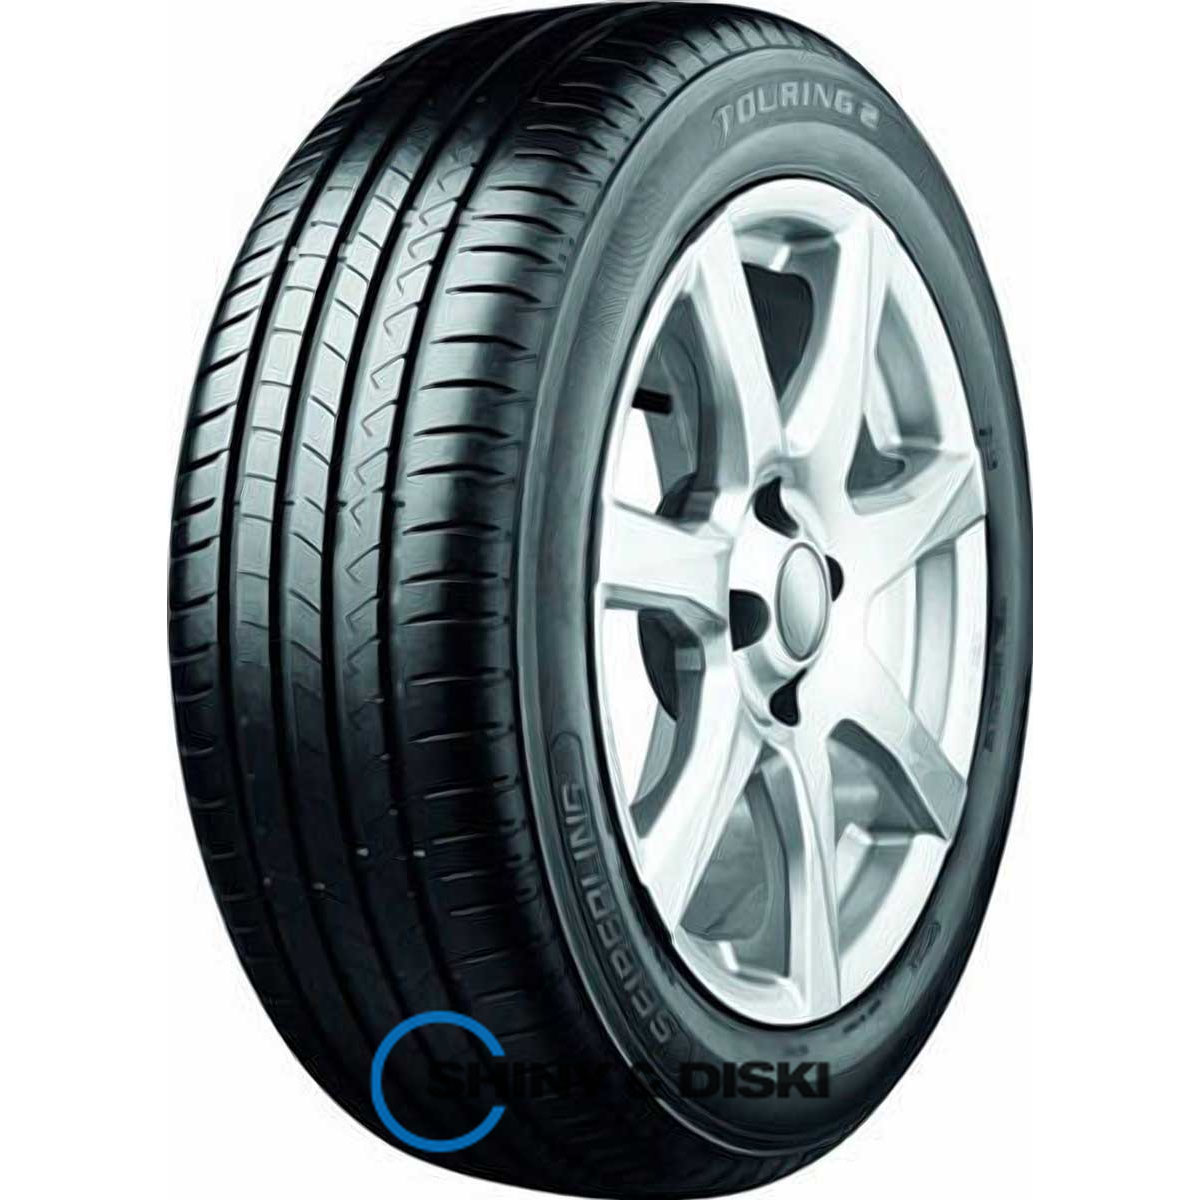 seiberling touring 2 165/70 r13 79t